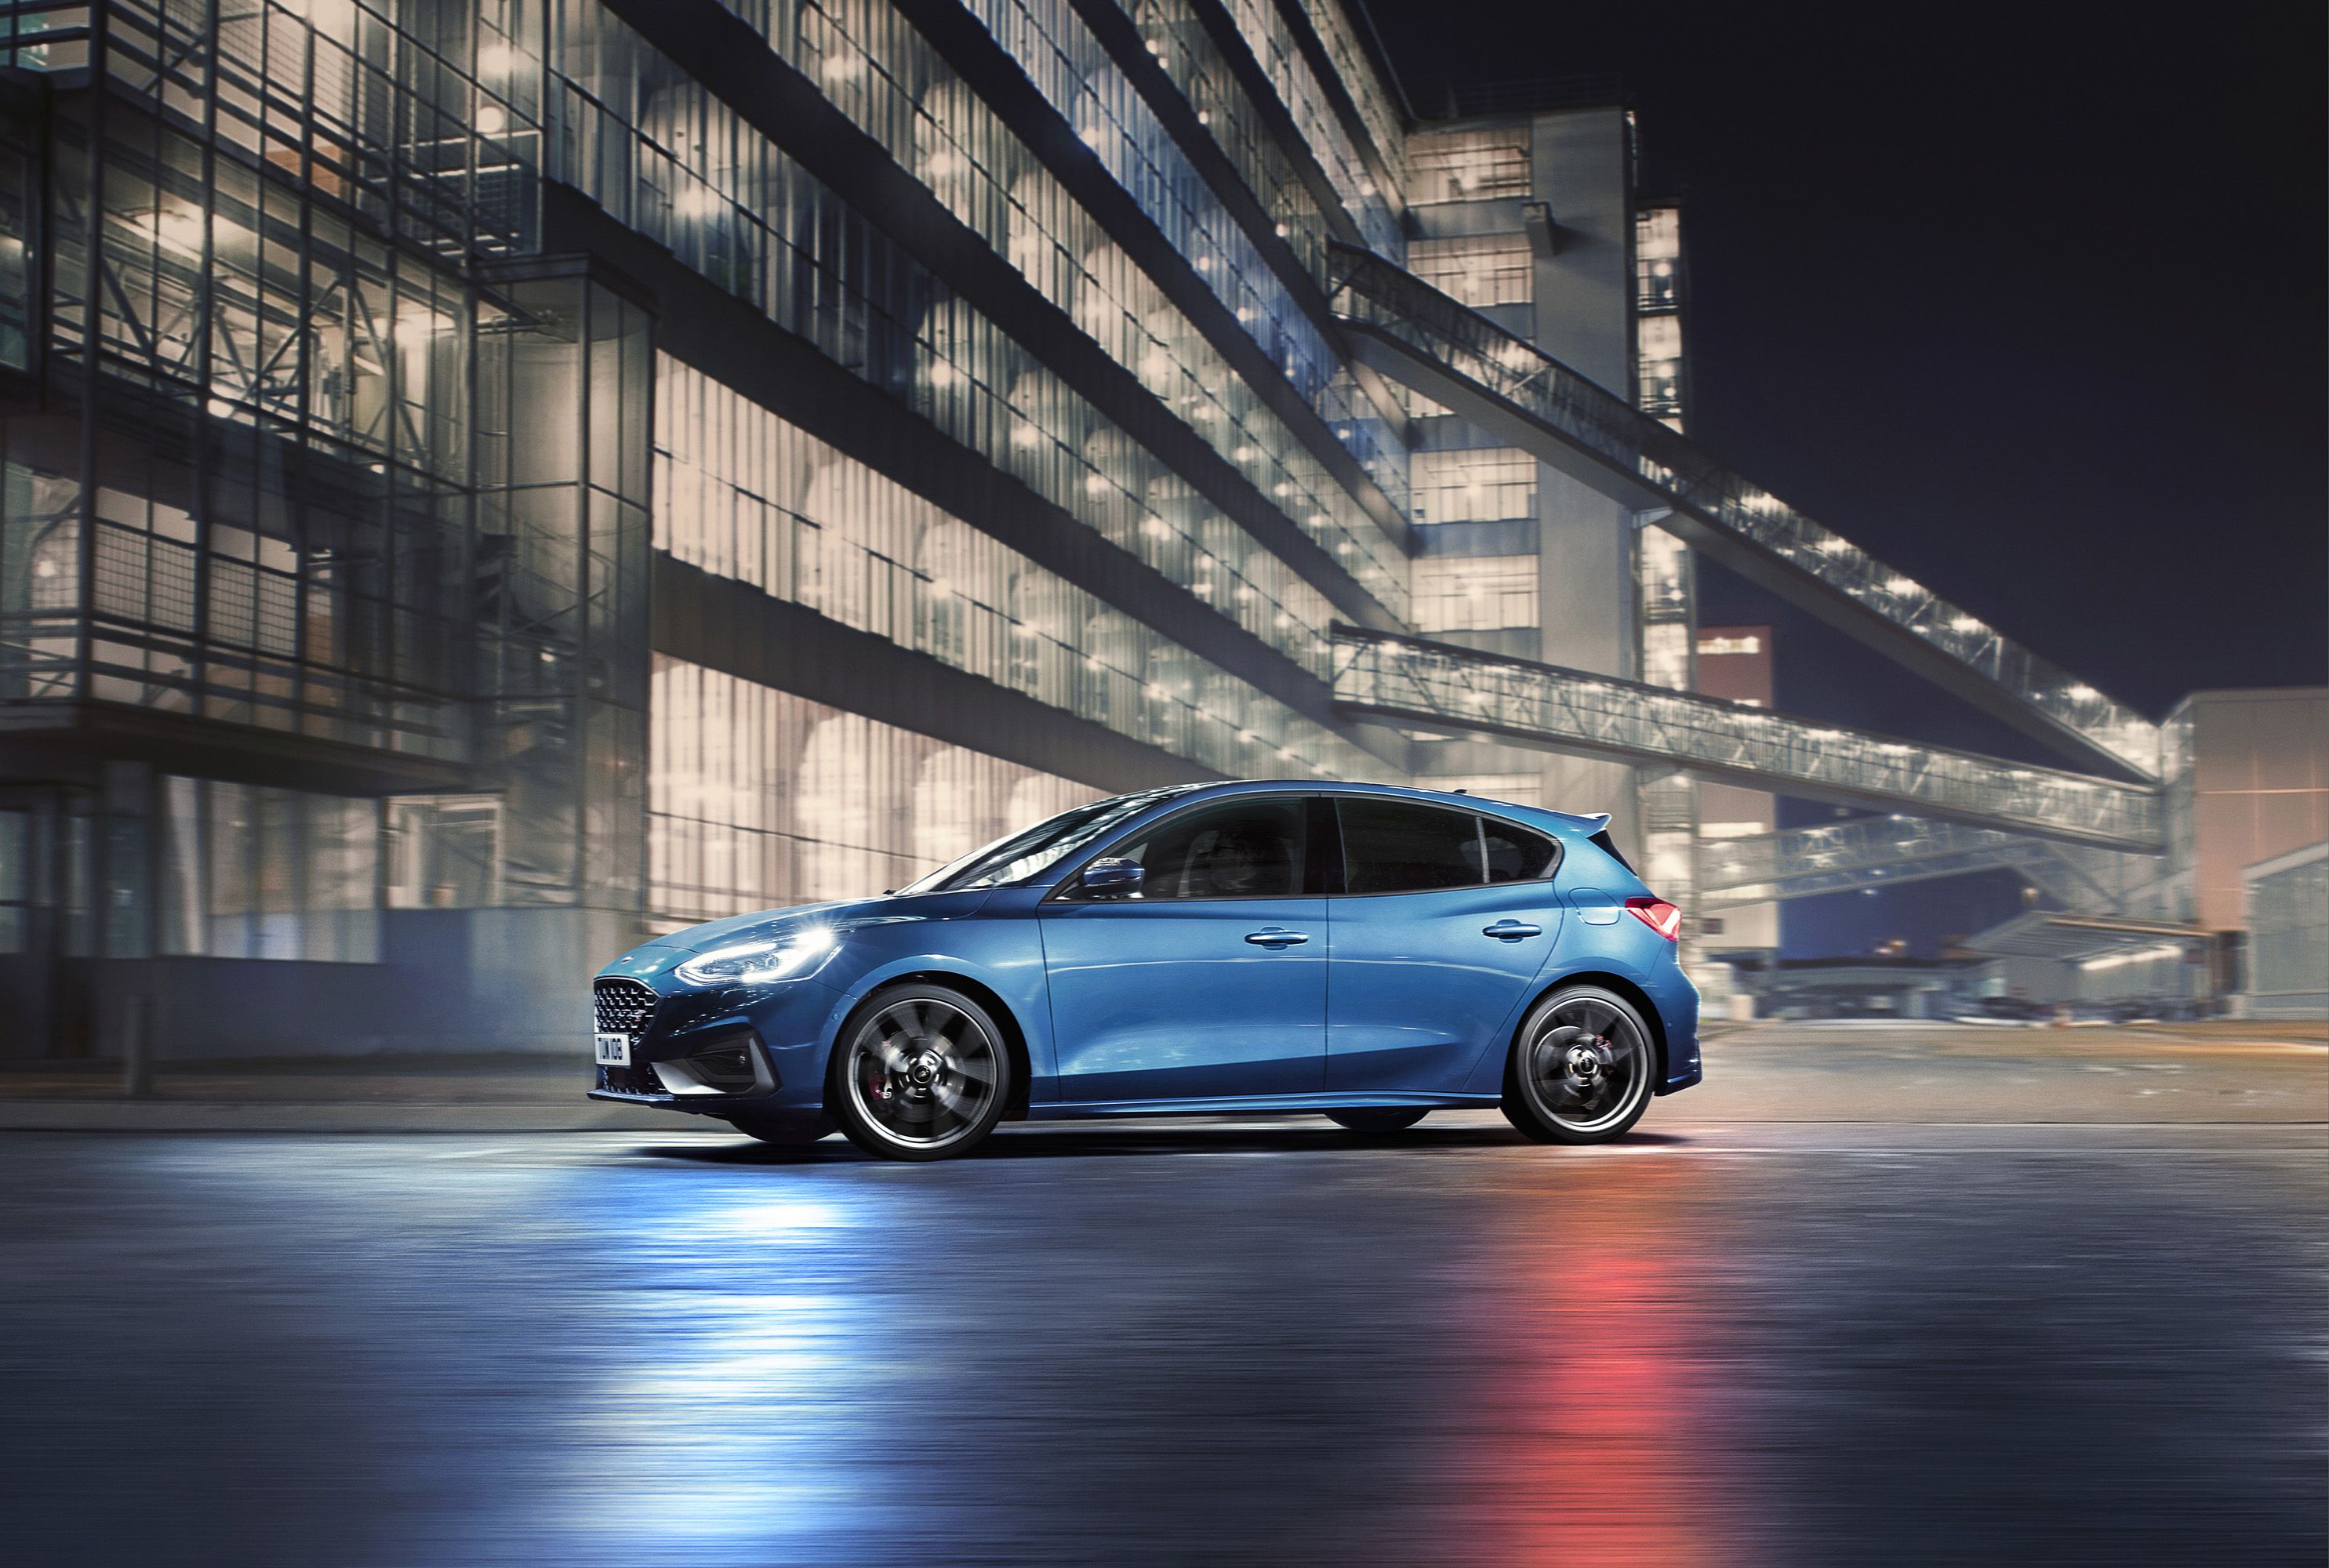 2019 Ford Focus ST Mk4 debuts - 276 hp and 430 Nm 2.3 litre turbo, 6-sp  manual or 7-sp auto transmissions 